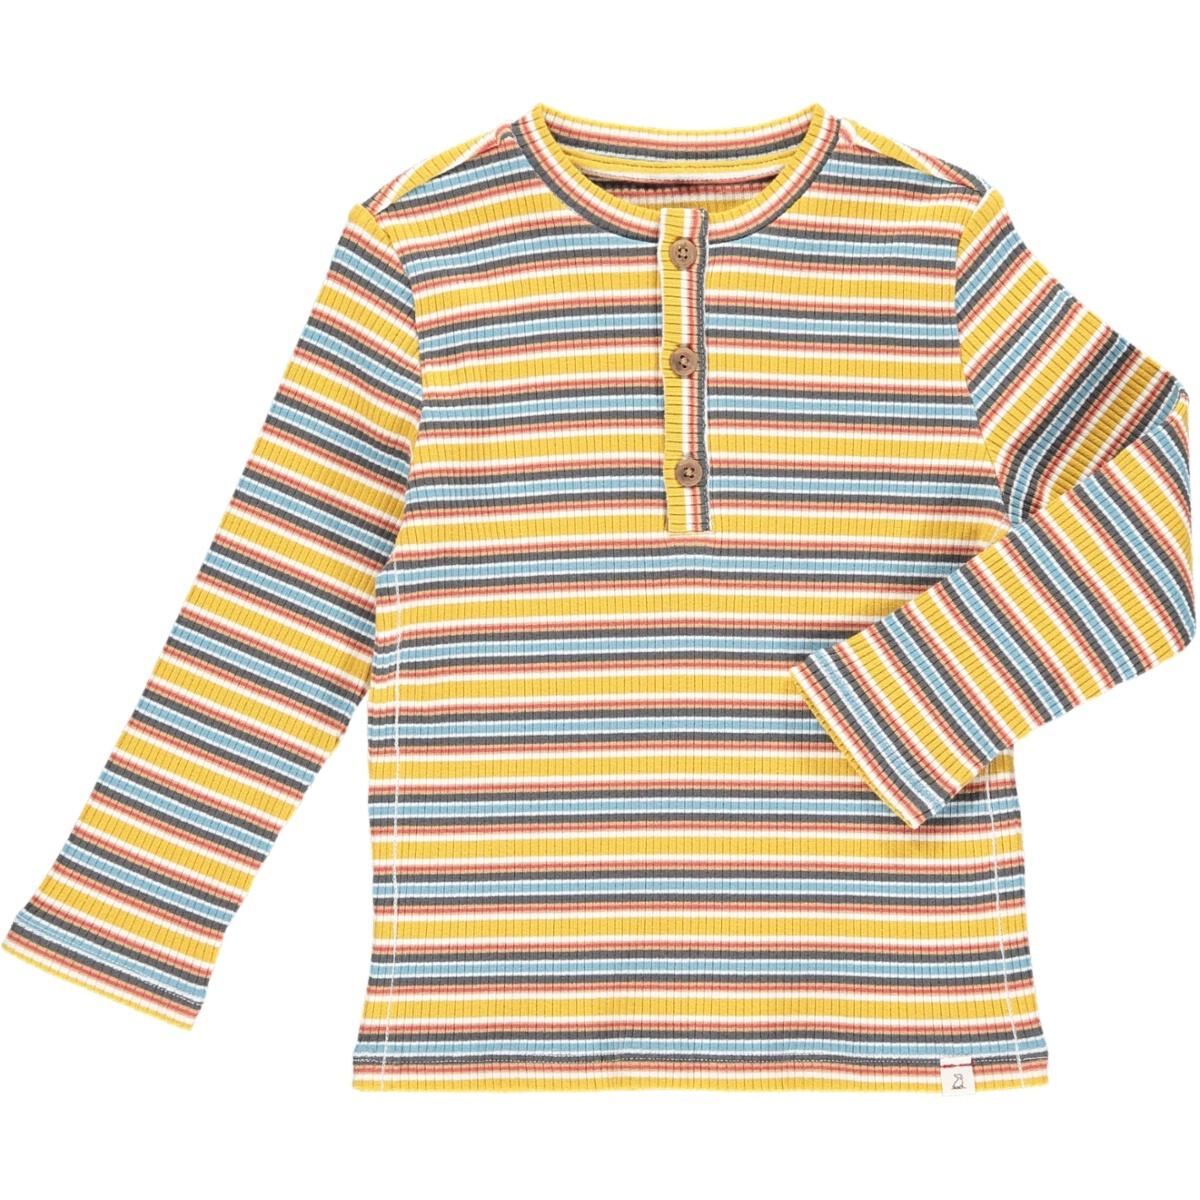 Striped Ribbed Henley Shirt in Mustard